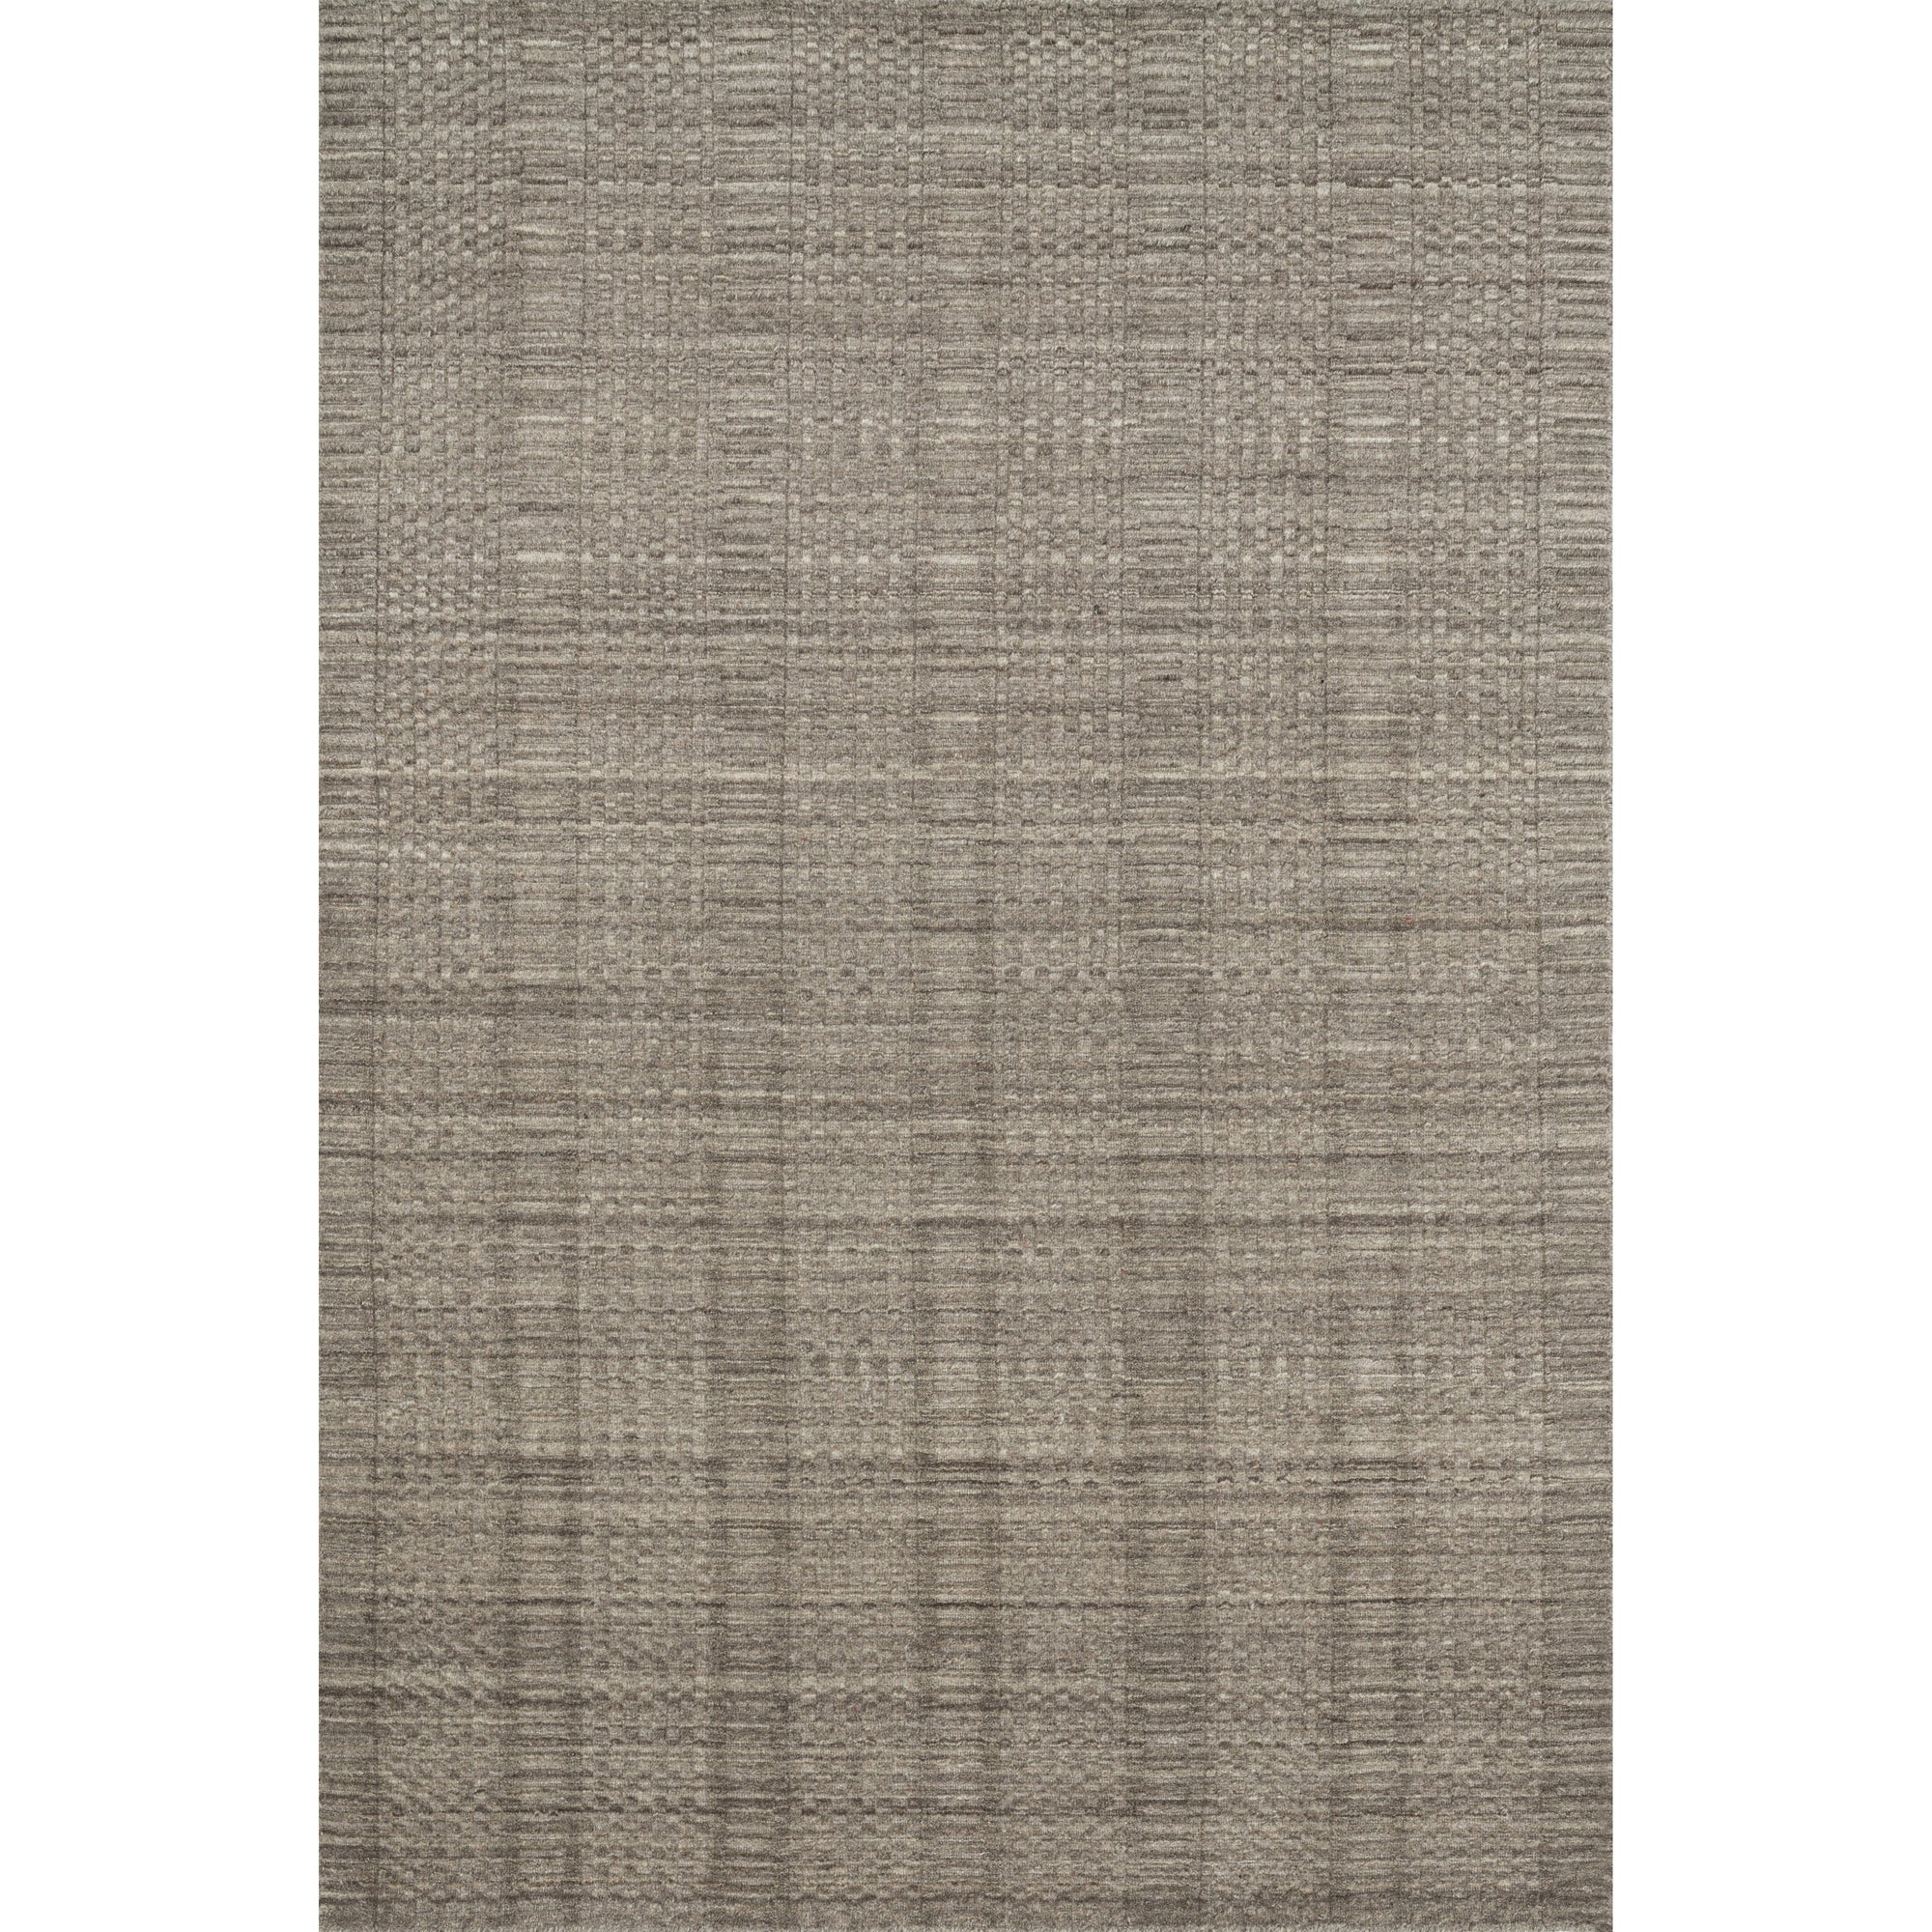 Rugs by Roo Loloi Hadley Stone Area Rug in size 18" x 18" Sample